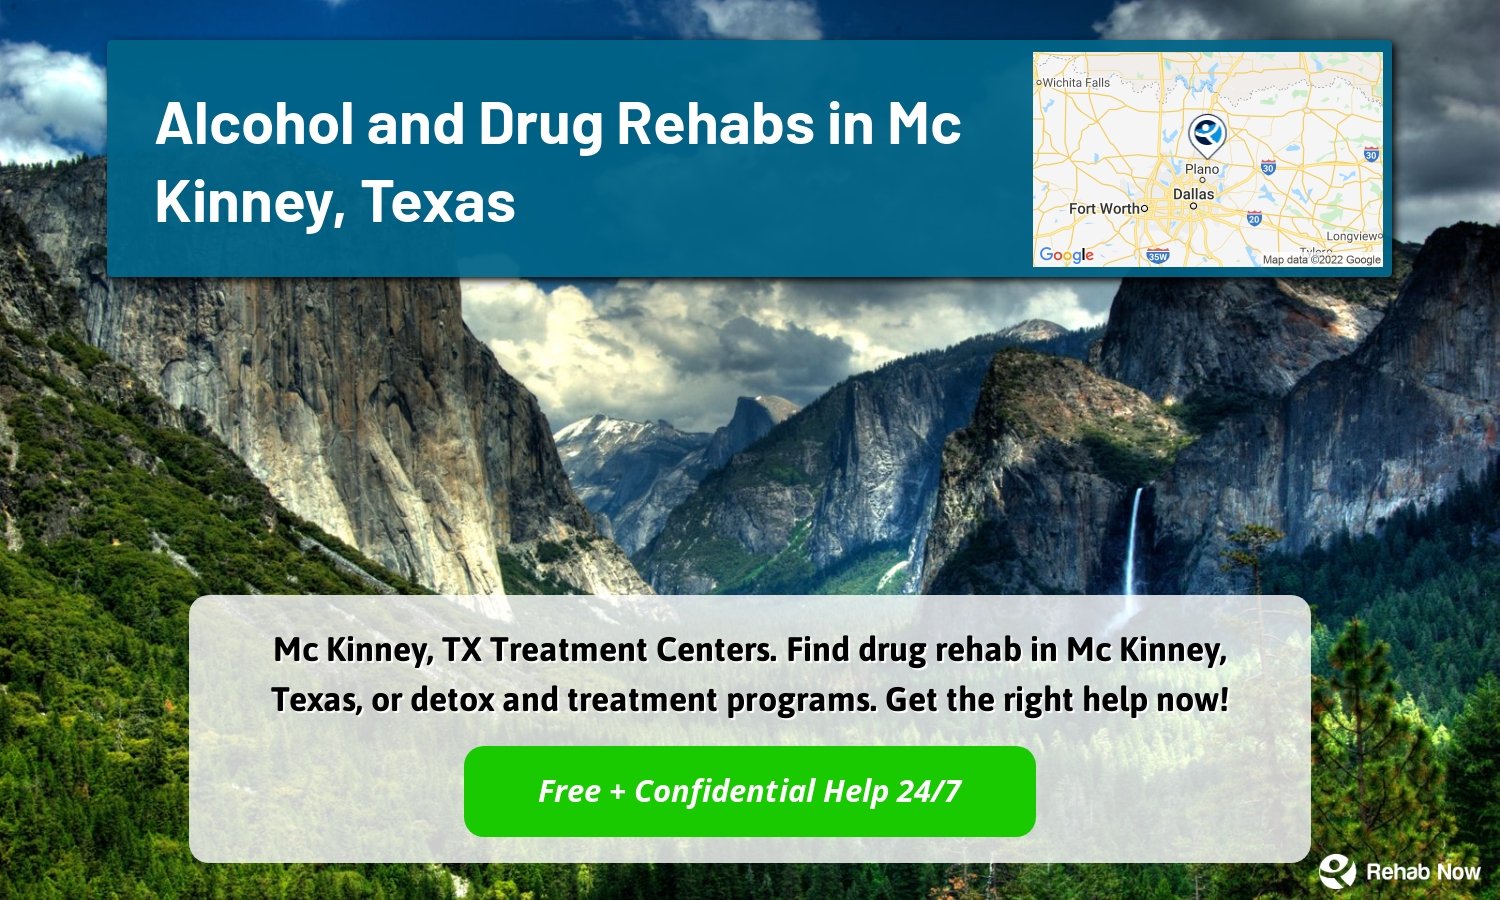 Mc Kinney, TX Treatment Centers. Find drug rehab in Mc Kinney, Texas, or detox and treatment programs. Get the right help now!